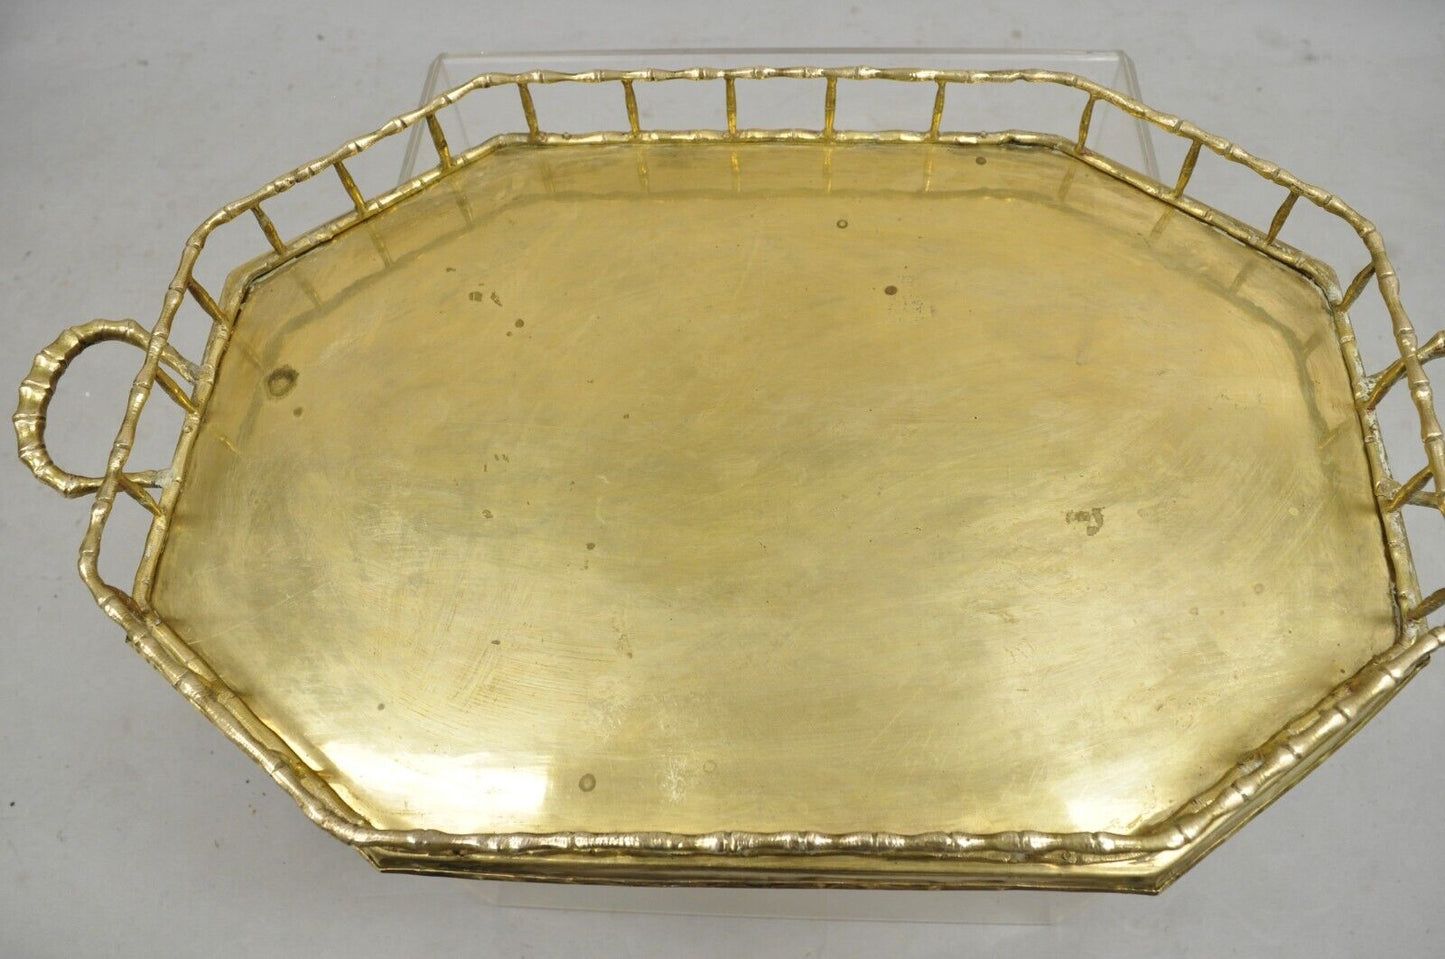 Vintage Hollywood Regency Faux Bamboo Solid Brass Octagonal Serving Platter Tray